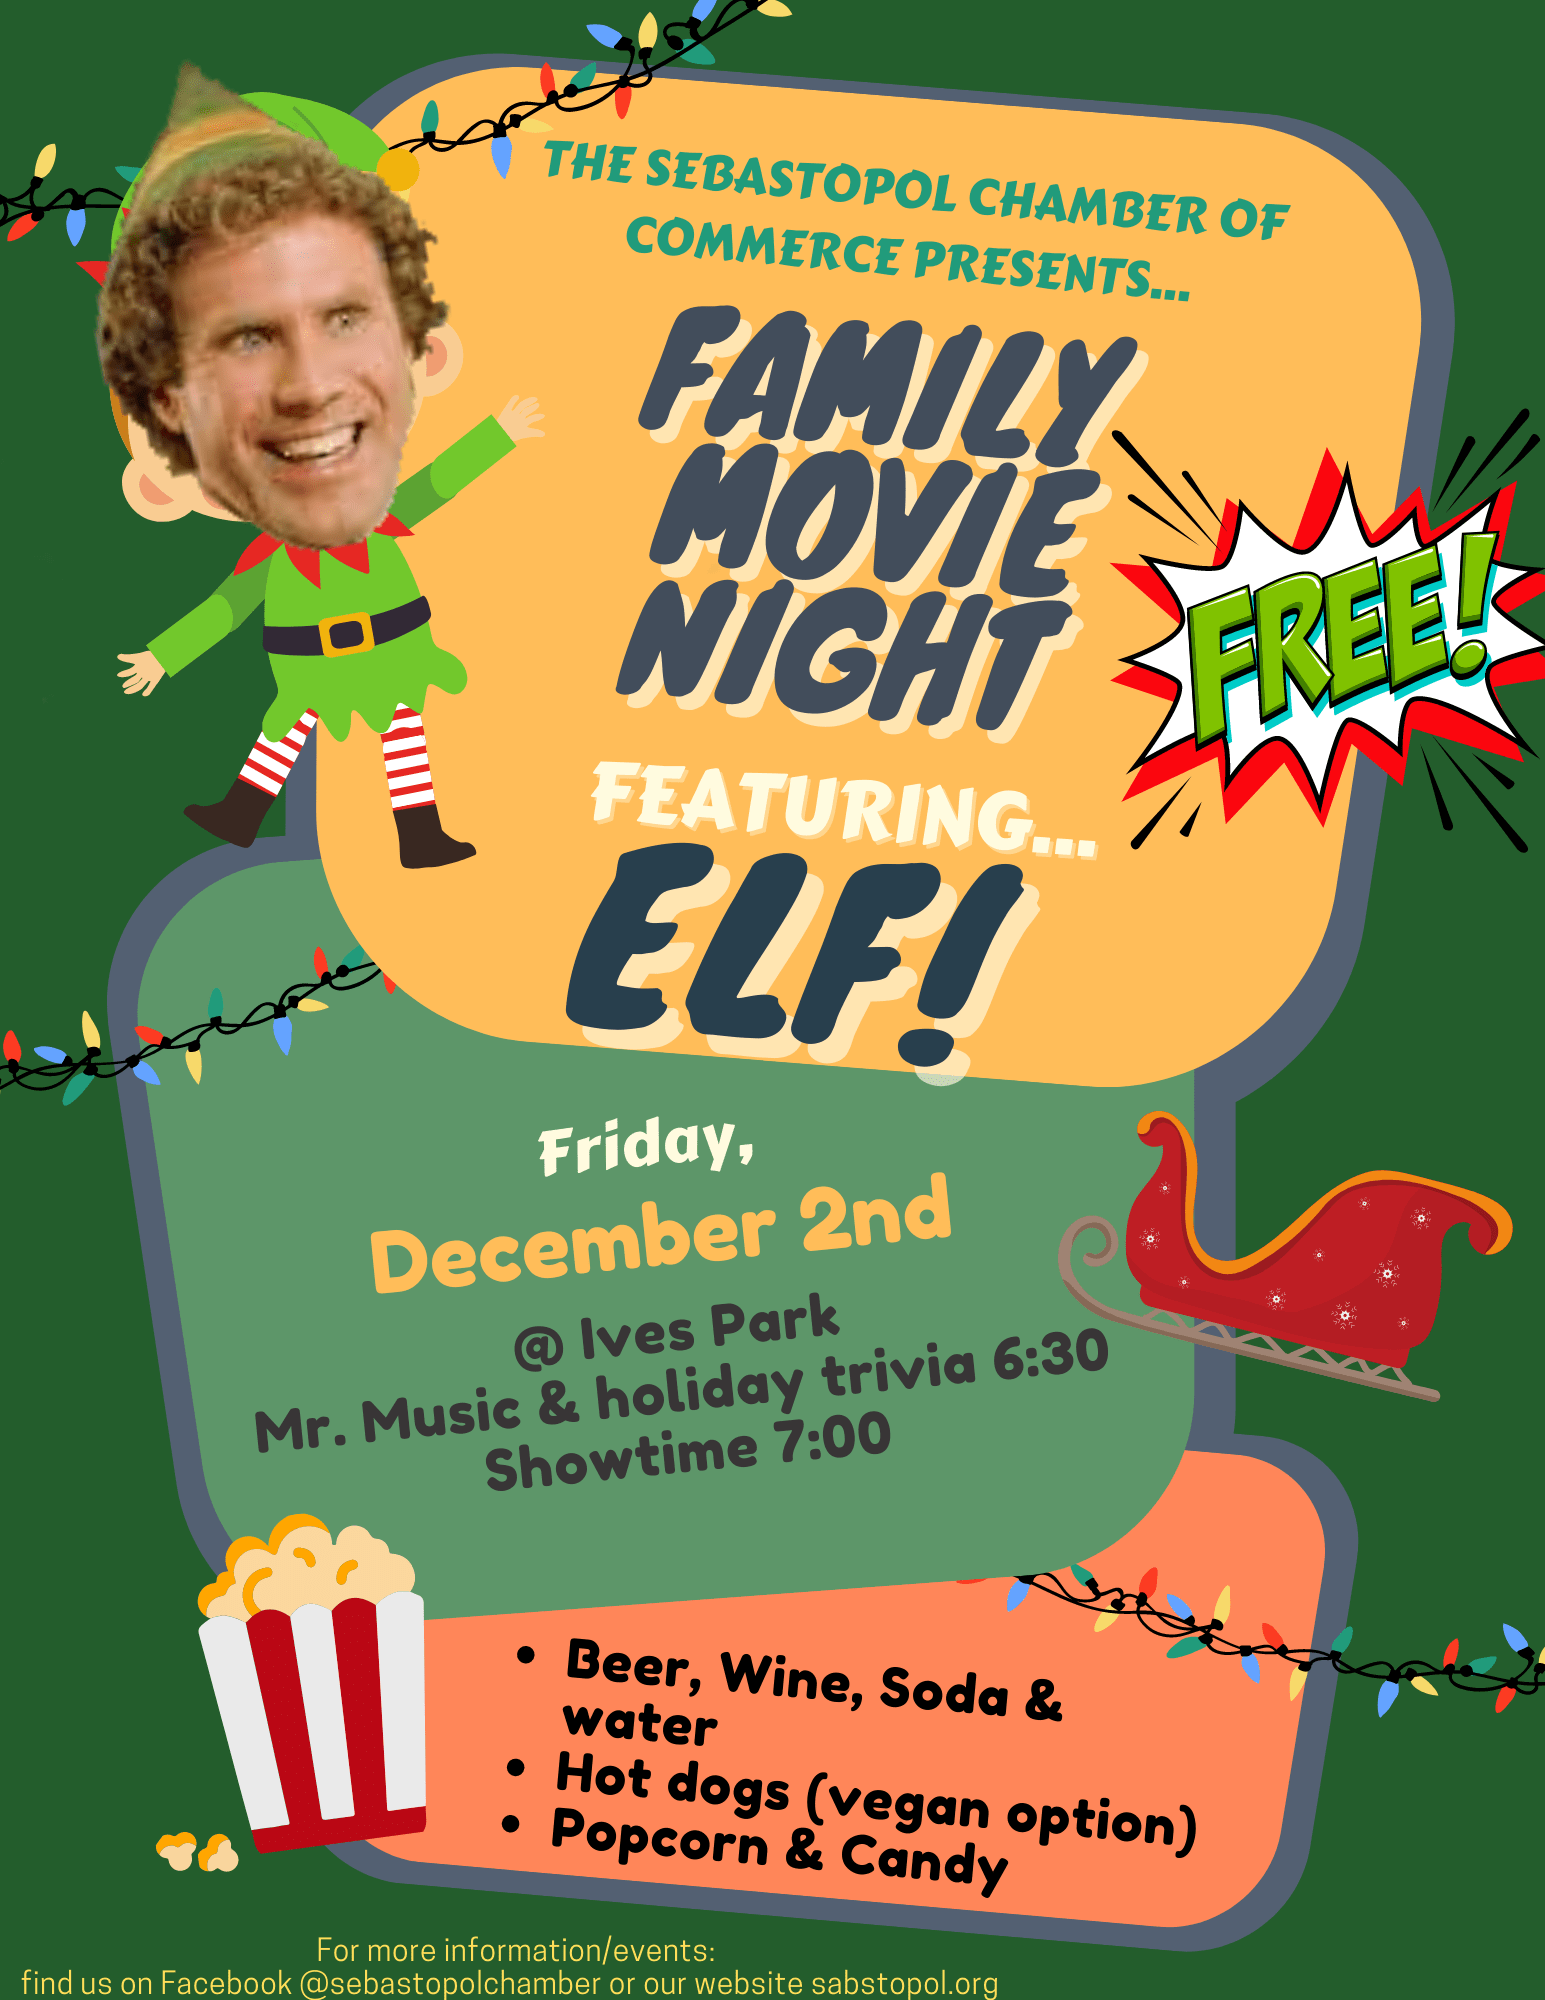 https://dehayf5mhw1h7.cloudfront.net/wp-content/uploads/sites/1697/2022/11/14131242/Movie-night-flyer.png